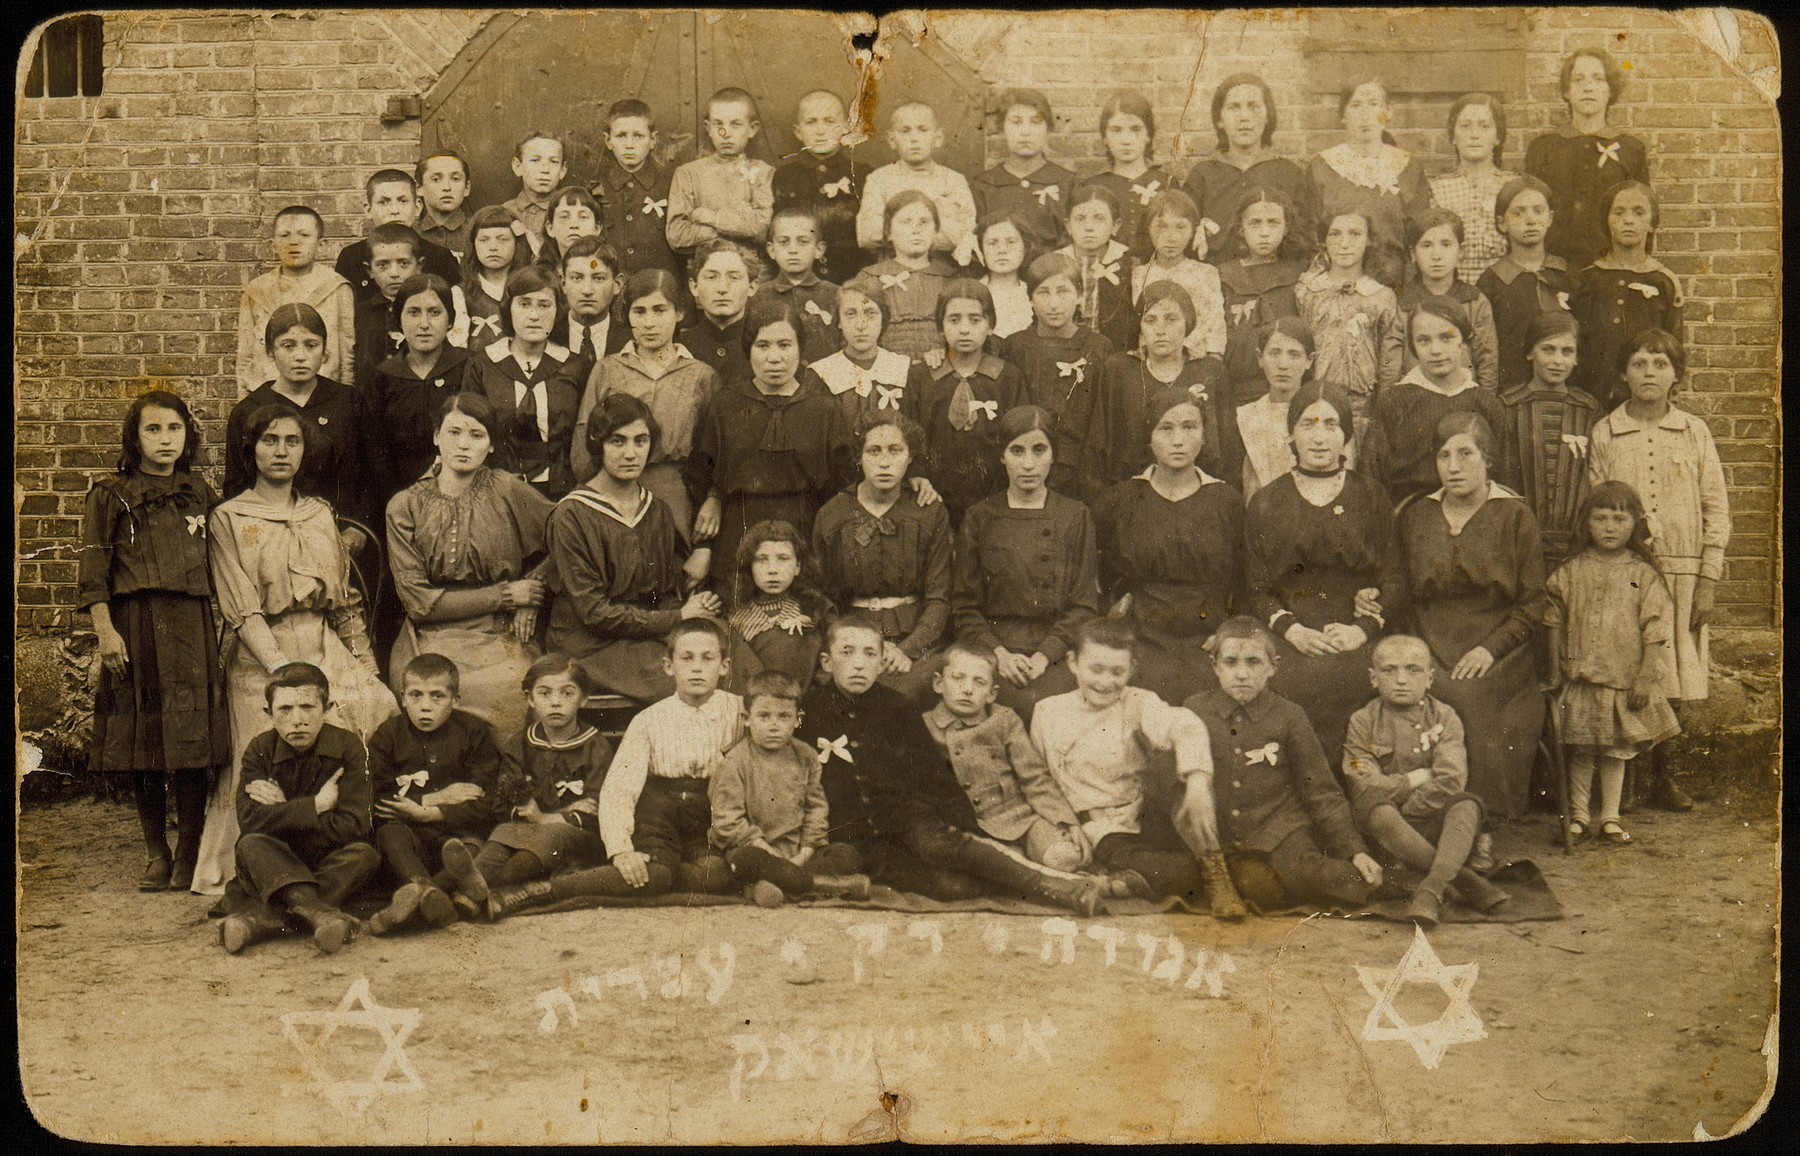 Members of the Rak Ivrit (Only Hebrew) society founded by Leah Wilansky. 

The white bow on their chests indicates that Hebrew, not Yiddish, is the member's daily language.  In the third row, fifth from left, is Sarah Rubinstein, the Hebrew instructor, who was the first female teacher to teach boys as well as girls.  

Shlomo Kiuchefski is sitting on the ground, fifth from right.  The little girl in the second row, far right, is Esther Katz.  Fourth row, standing to the right of Sarah Rubinstein, is Shaul Kaleko and his brother Simha; the boy directly behind Sarah is Moshe Sonenson.  Behind him in the last last row is his brother Shalom, wearing a black outfit.  A significant number of the people in the photo immigrated to Palestine or other various countries.